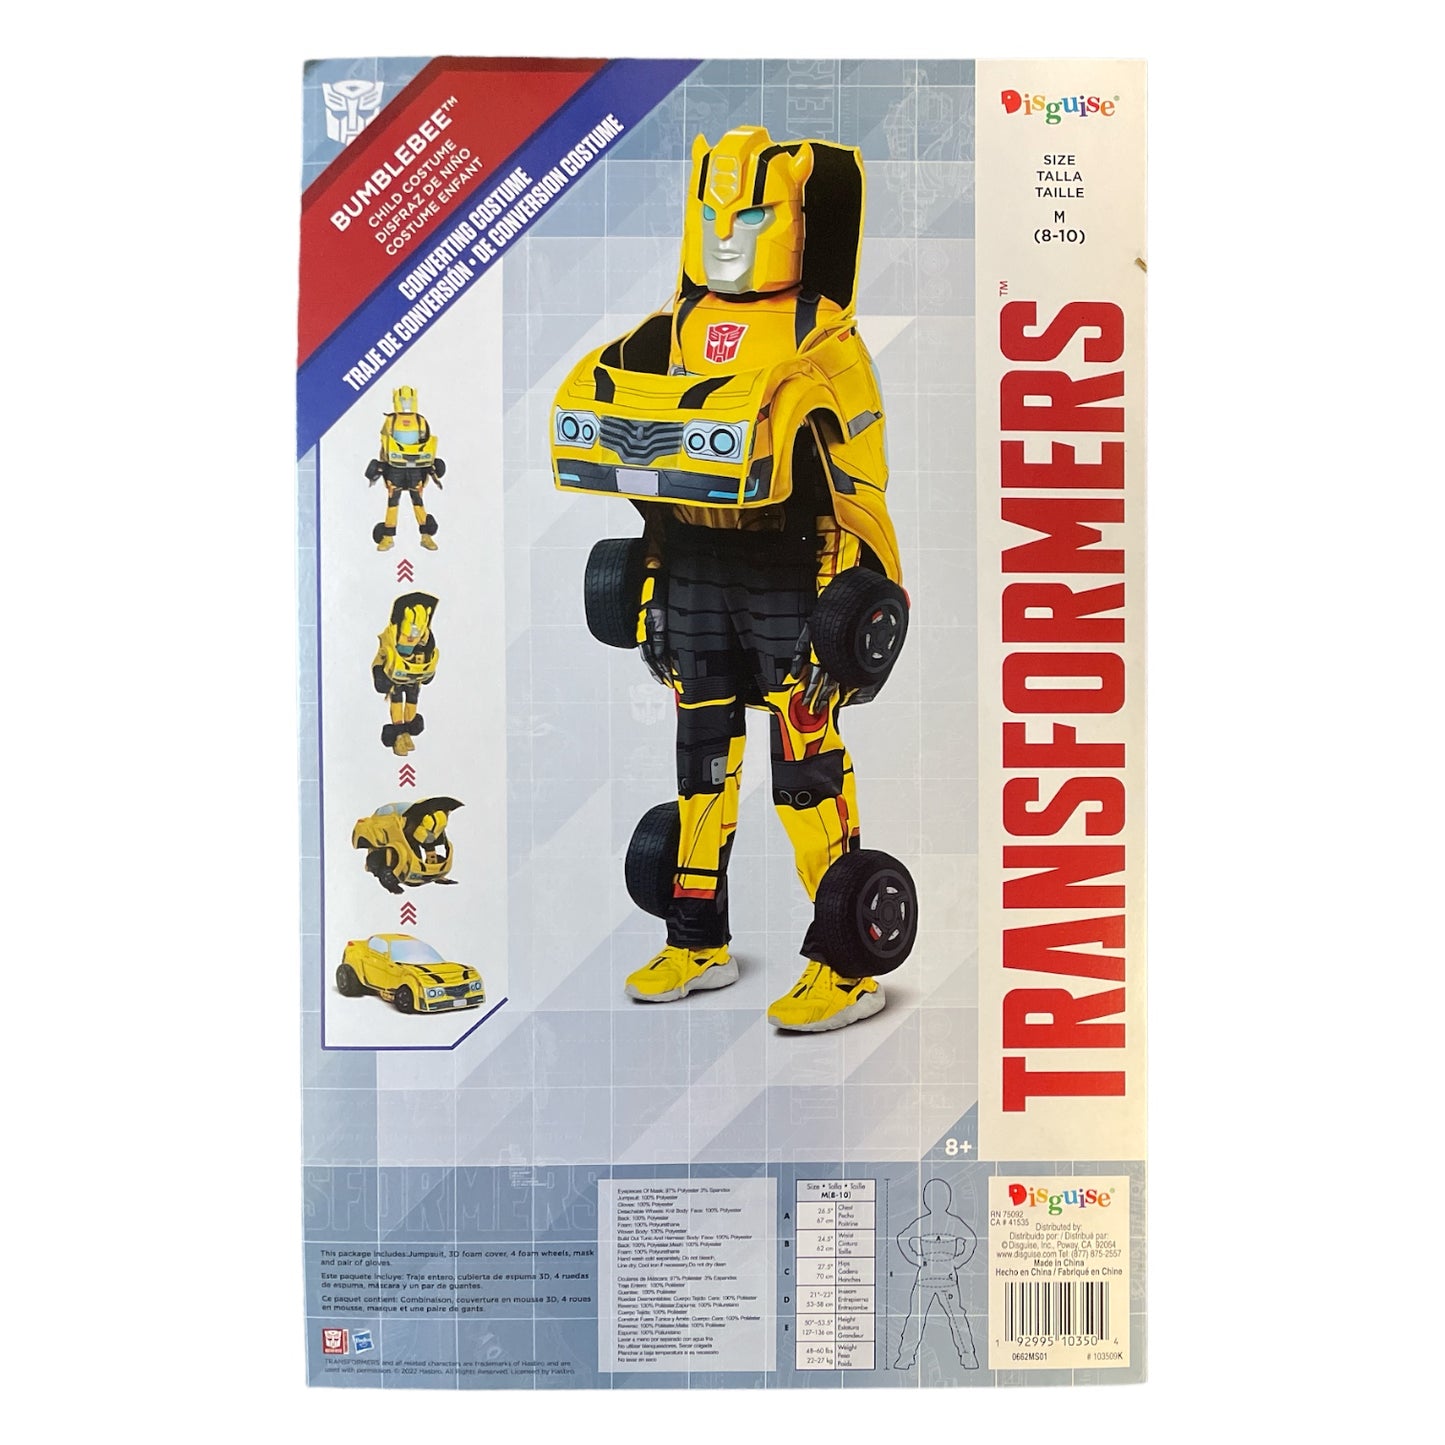 Disguise Transformers Bumblebee Converting Child Costume, M (8-10)